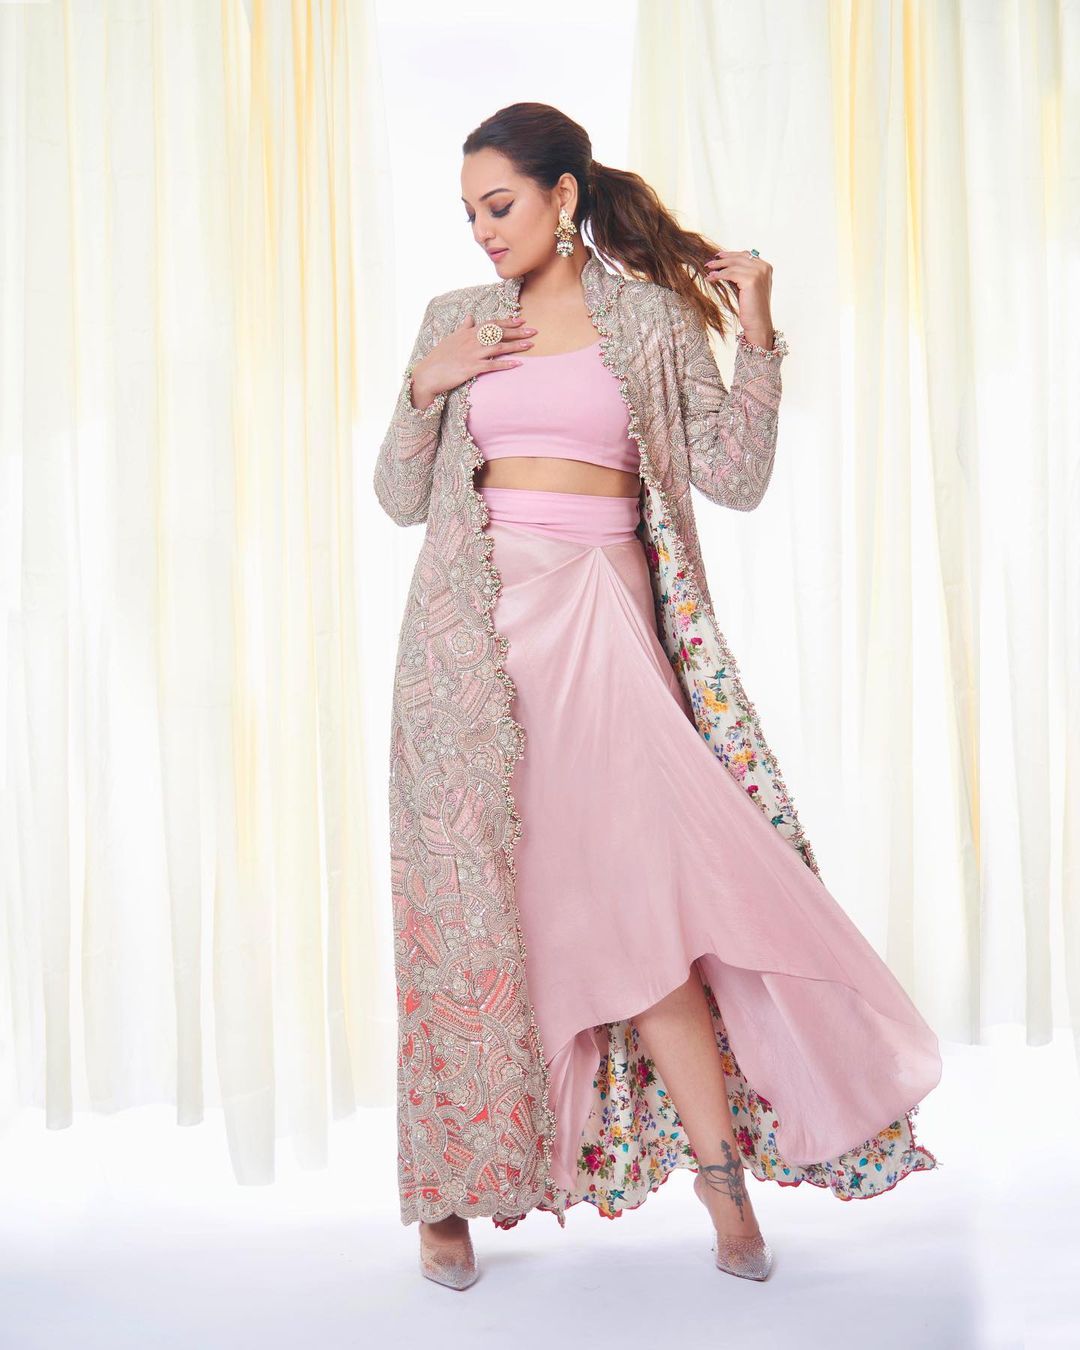 Sonakshi Sinha cuts a striking figure in a pink skirt set with an embellished jacket